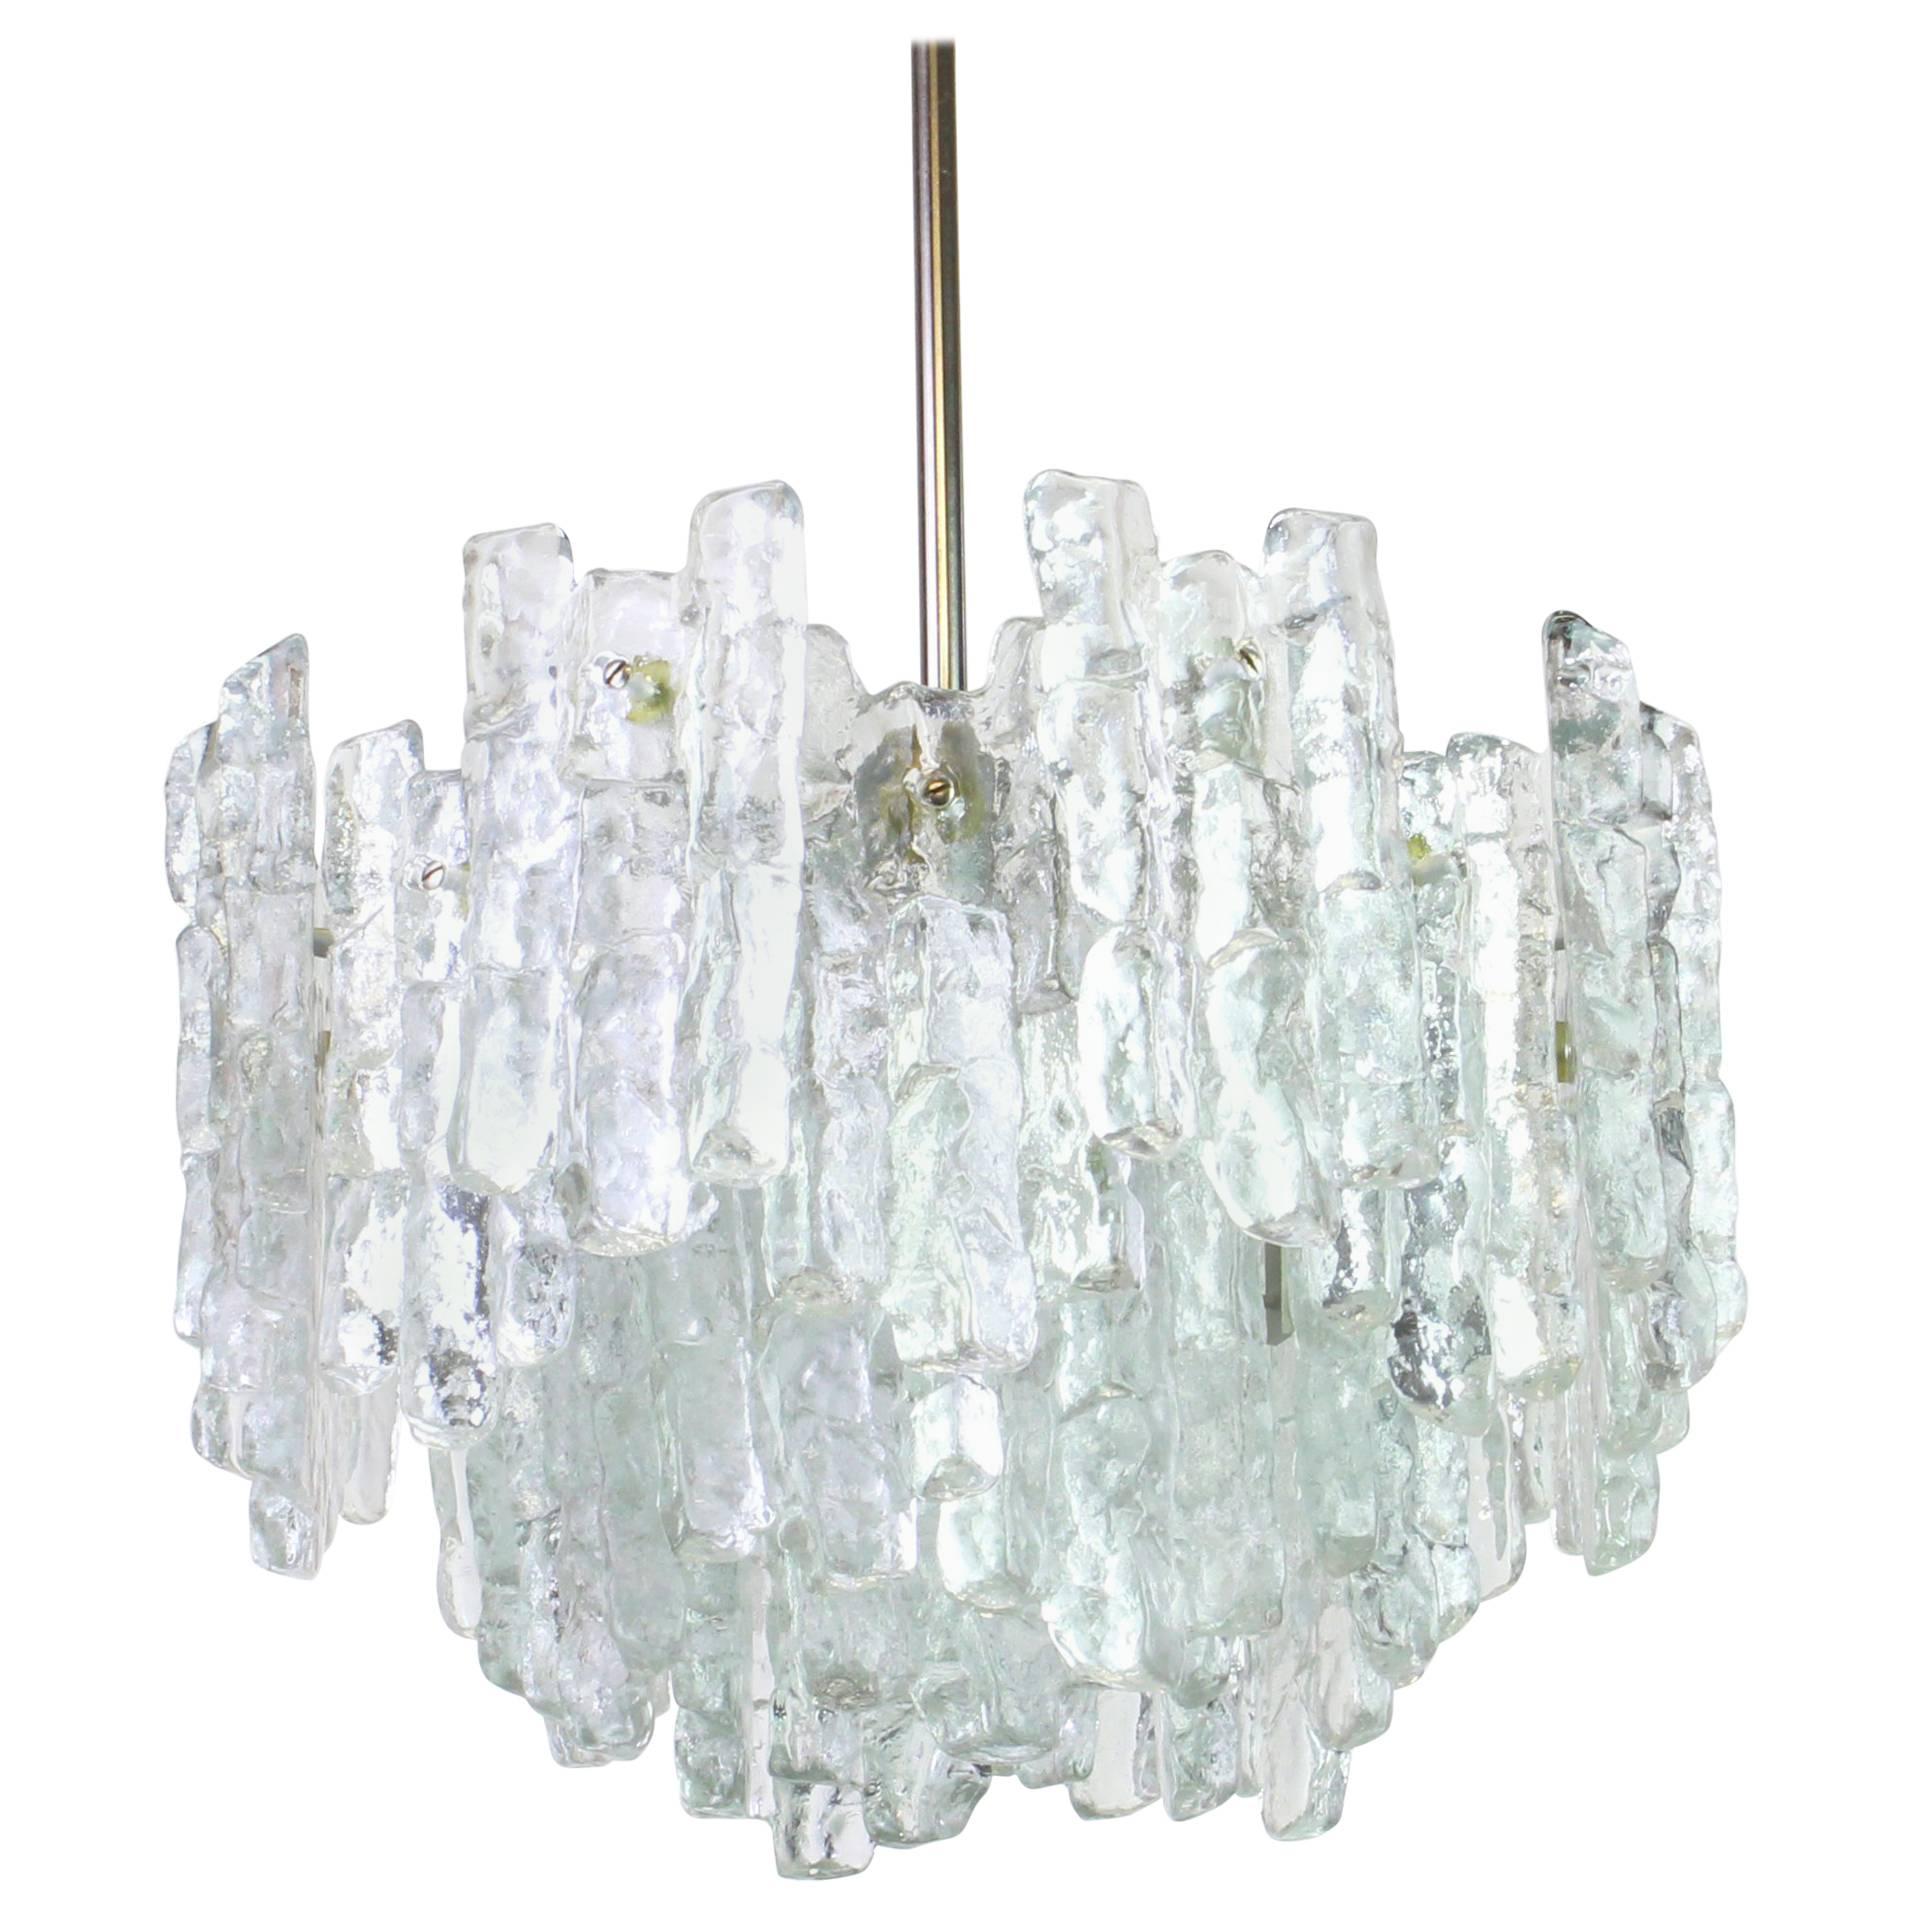 Stunning Murano glass chandelier by Kalmar, 1960s
Three tiers structure gathering 28 structured glasses, beautifully refracting the light very heavy quality.
High quality and in very good condition. Cleaned, well-wired and ready to use. 
The